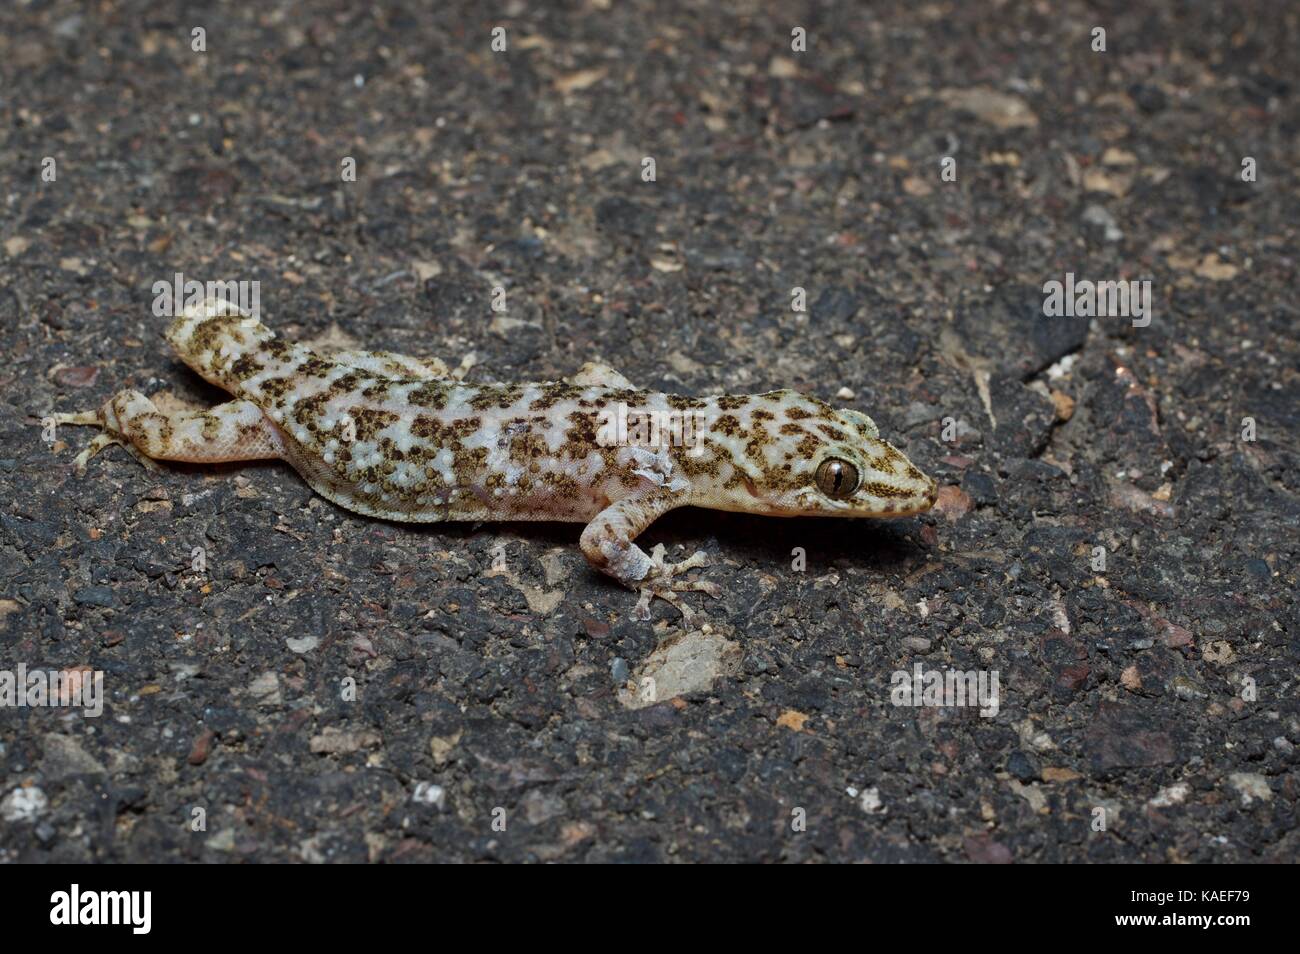 A Yellow-bellied Gecko (Phyllodactylus tuberculosus) with broken tail on a paved road at night near Alamos, Sonora, Mexico Stock Photo